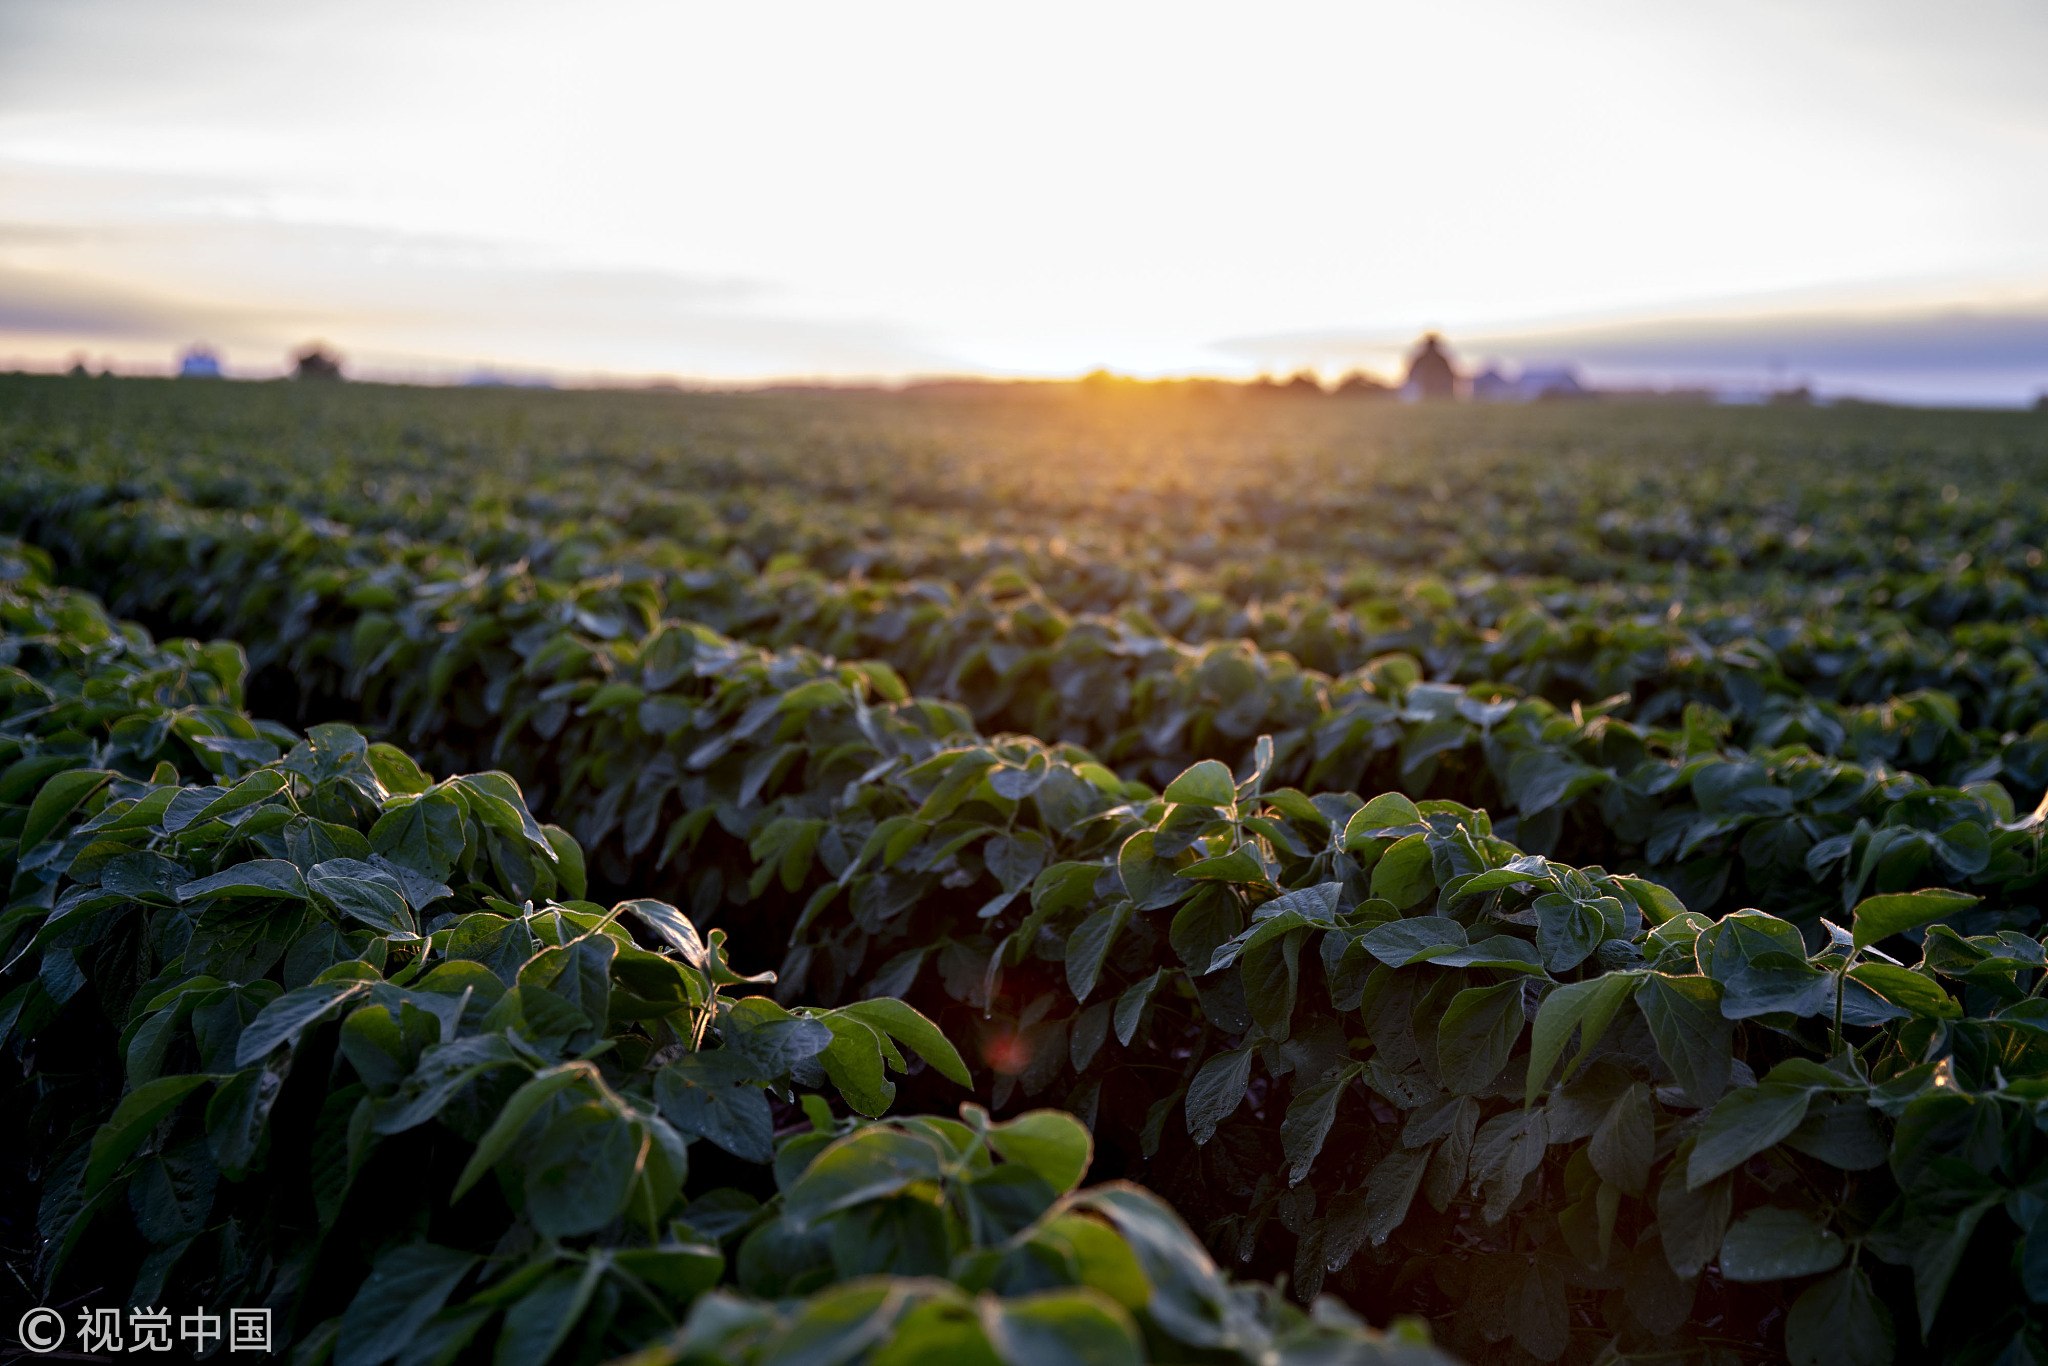 Soybean plants grow in a field near Tiskilwa, Illinois, US on June 19, 2018. A rout in commodities deepened as the threat of a trade war between the world's two biggest economies intensified, hitting markets from steel to soybeans. [Photo:VCG]